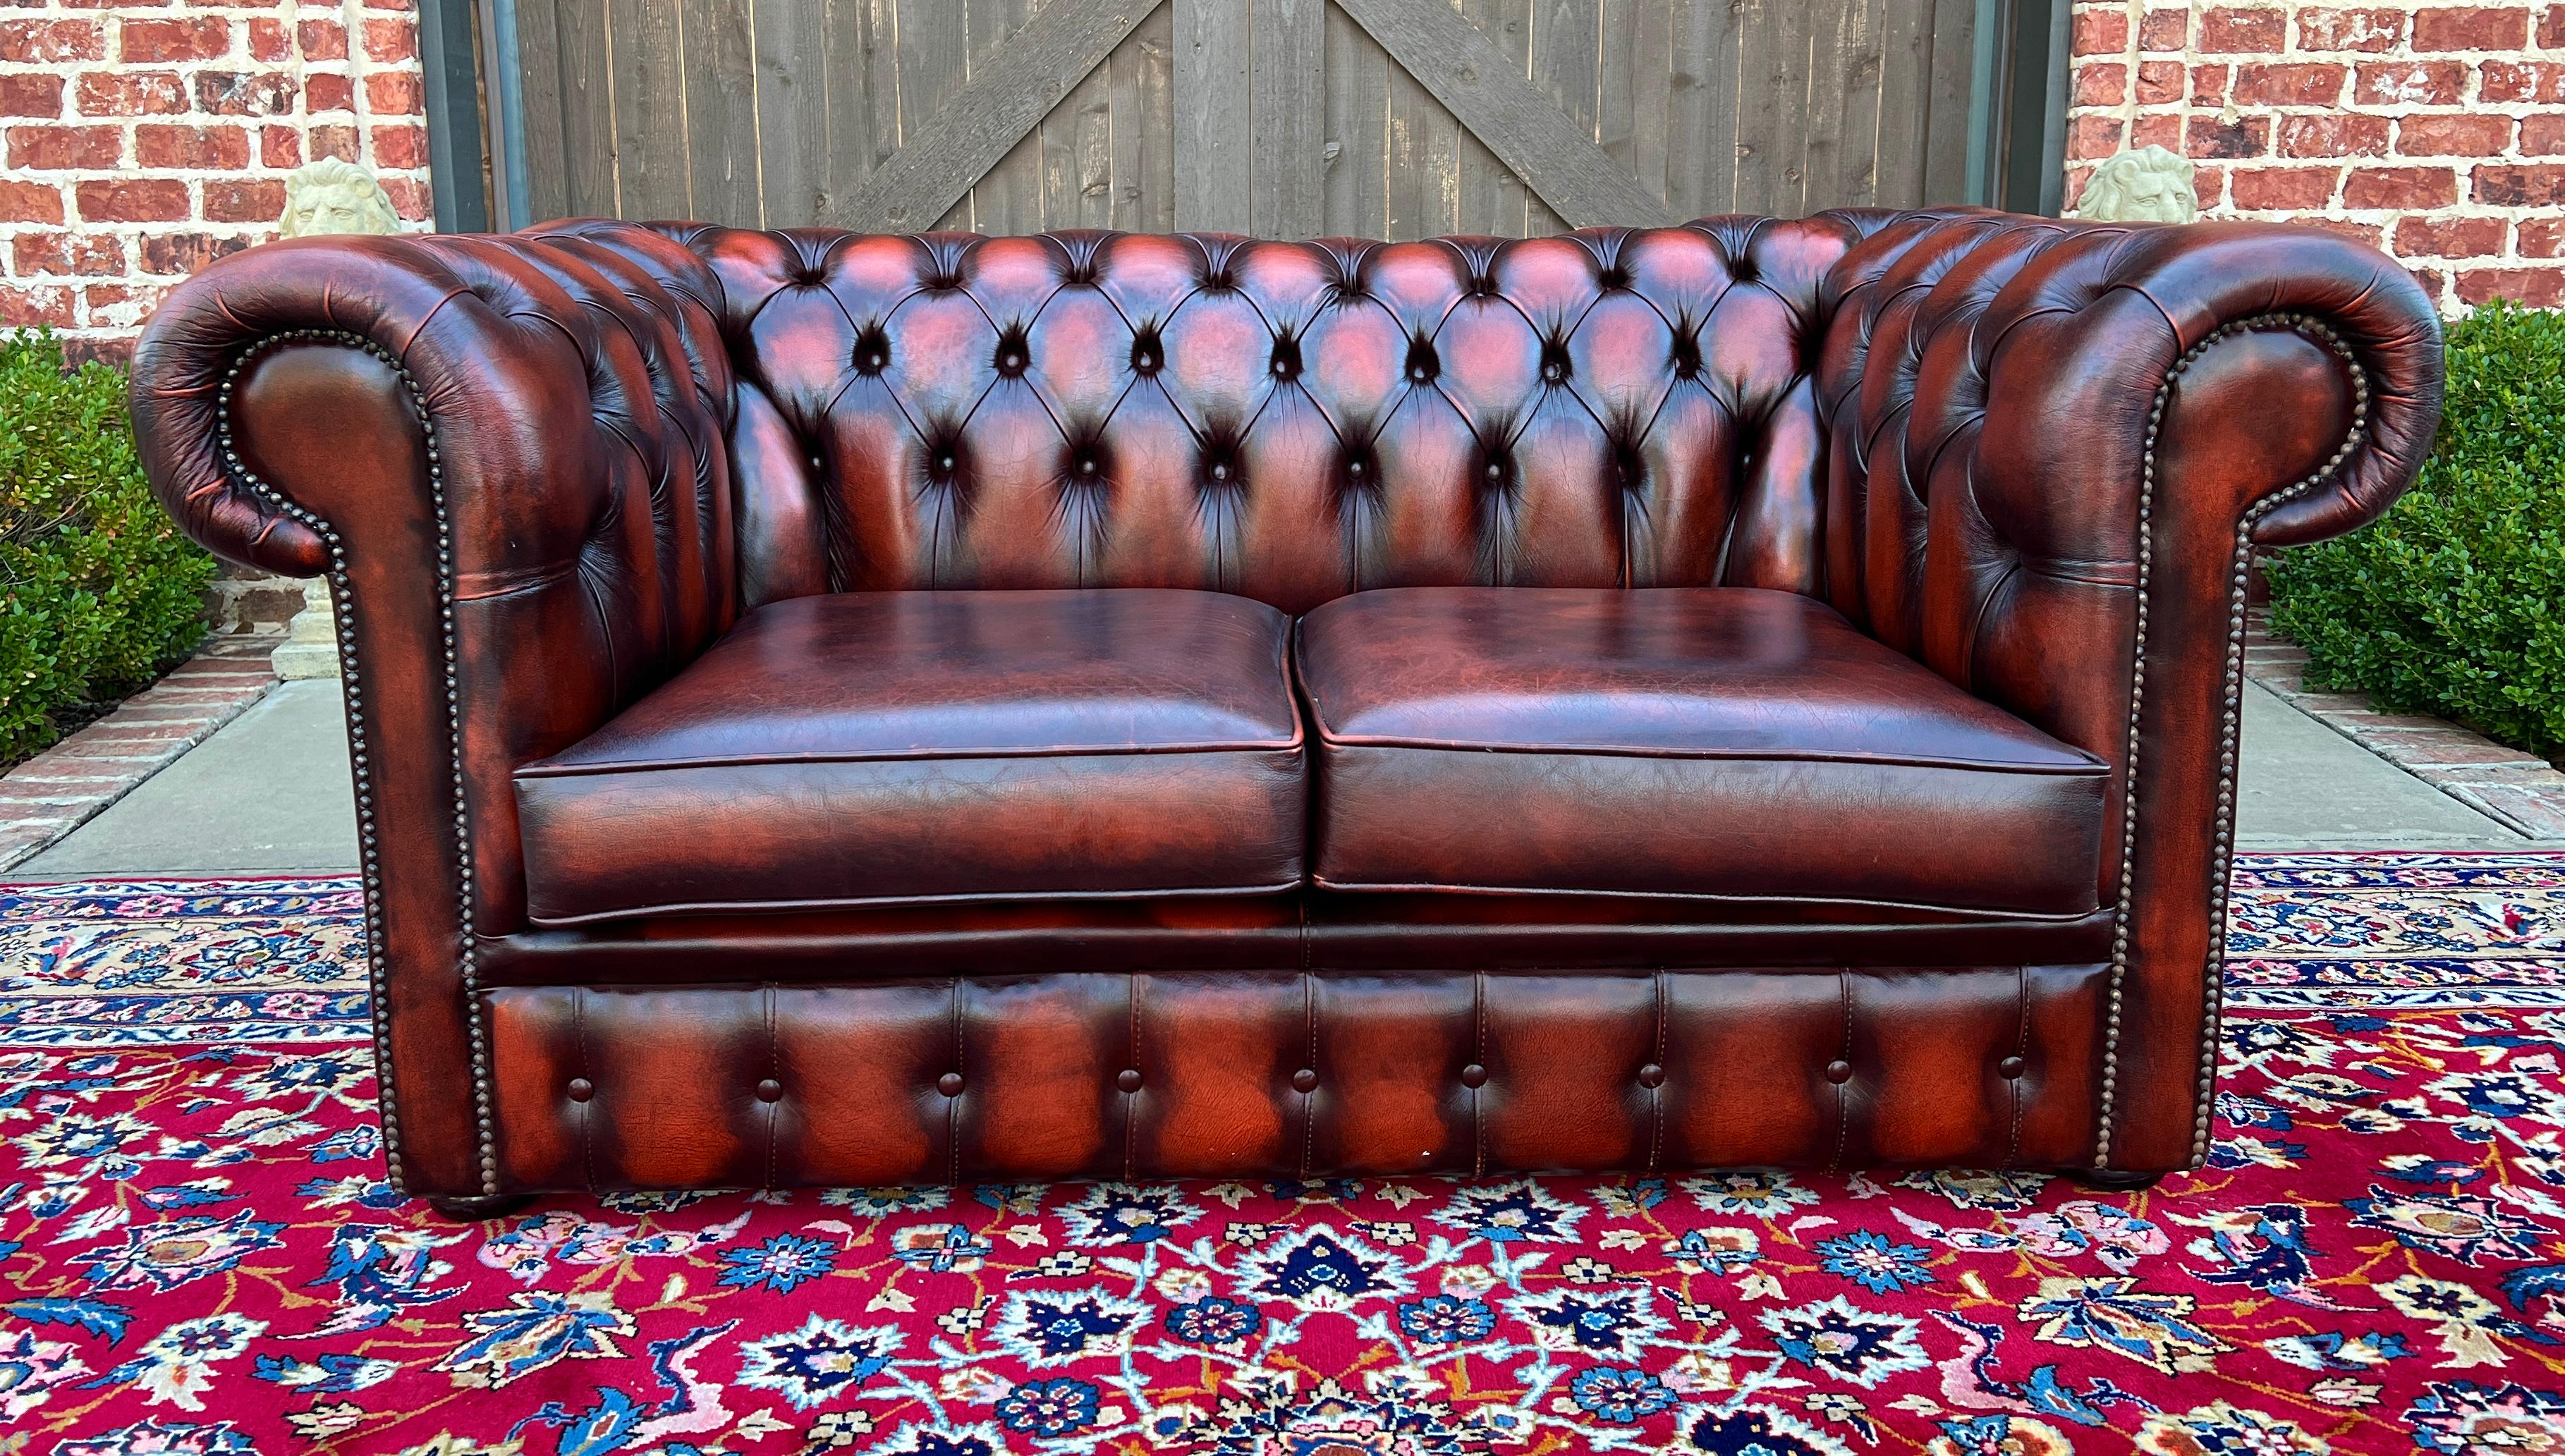 Vintage English Chesterfield Leather Tufted Love Seat Sofa Oxblood Red #1 For Sale 11